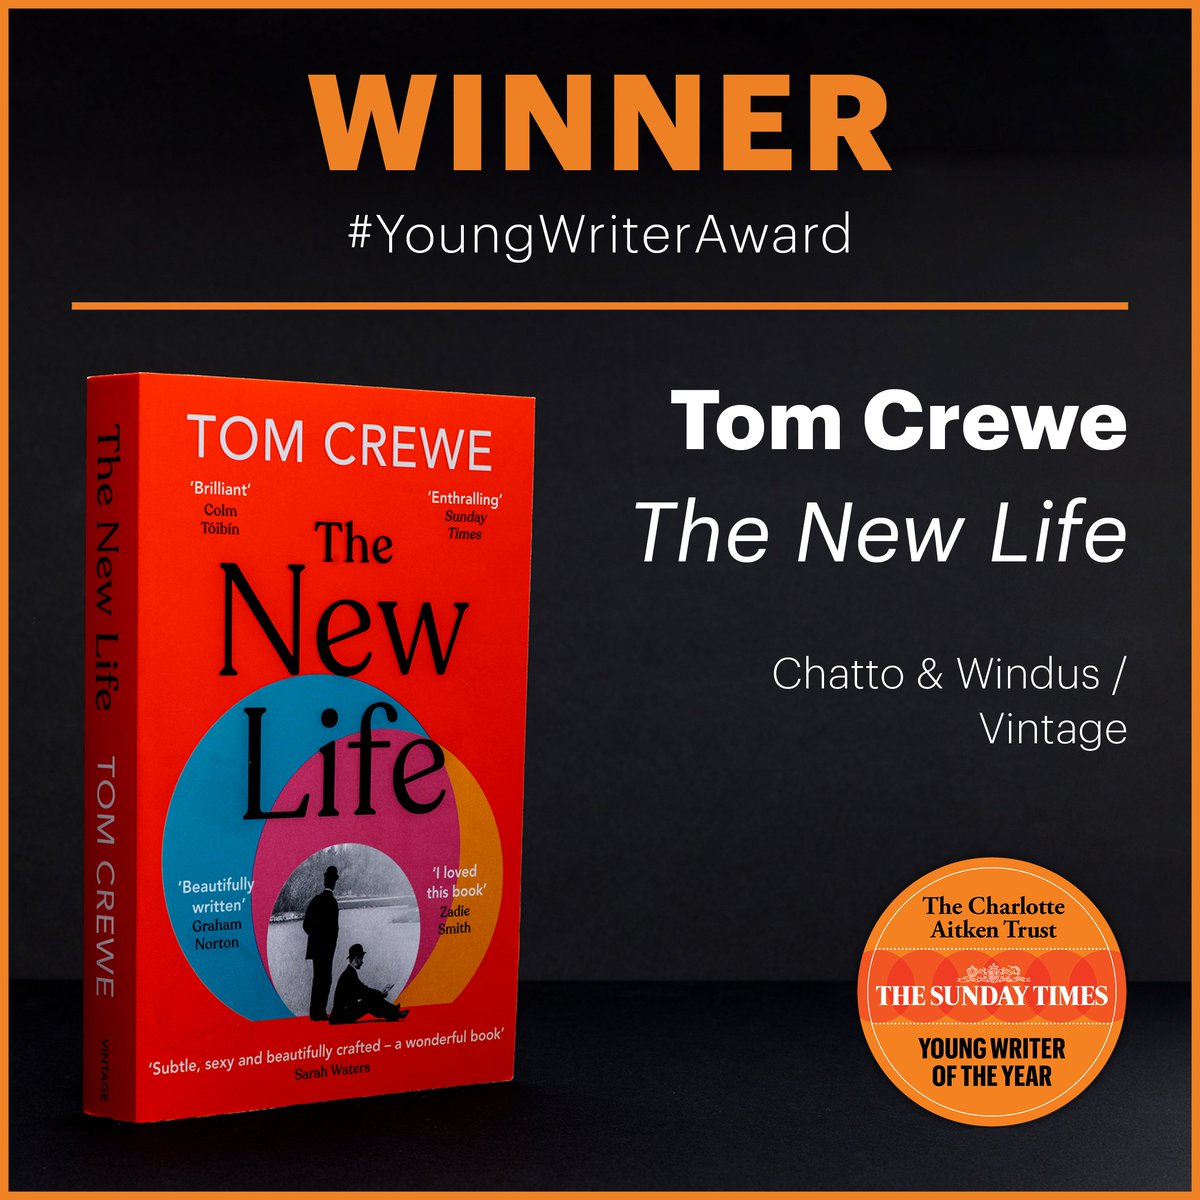 Tom Crewe is the winner of the Young Writer of the Year award for his novel The New Life